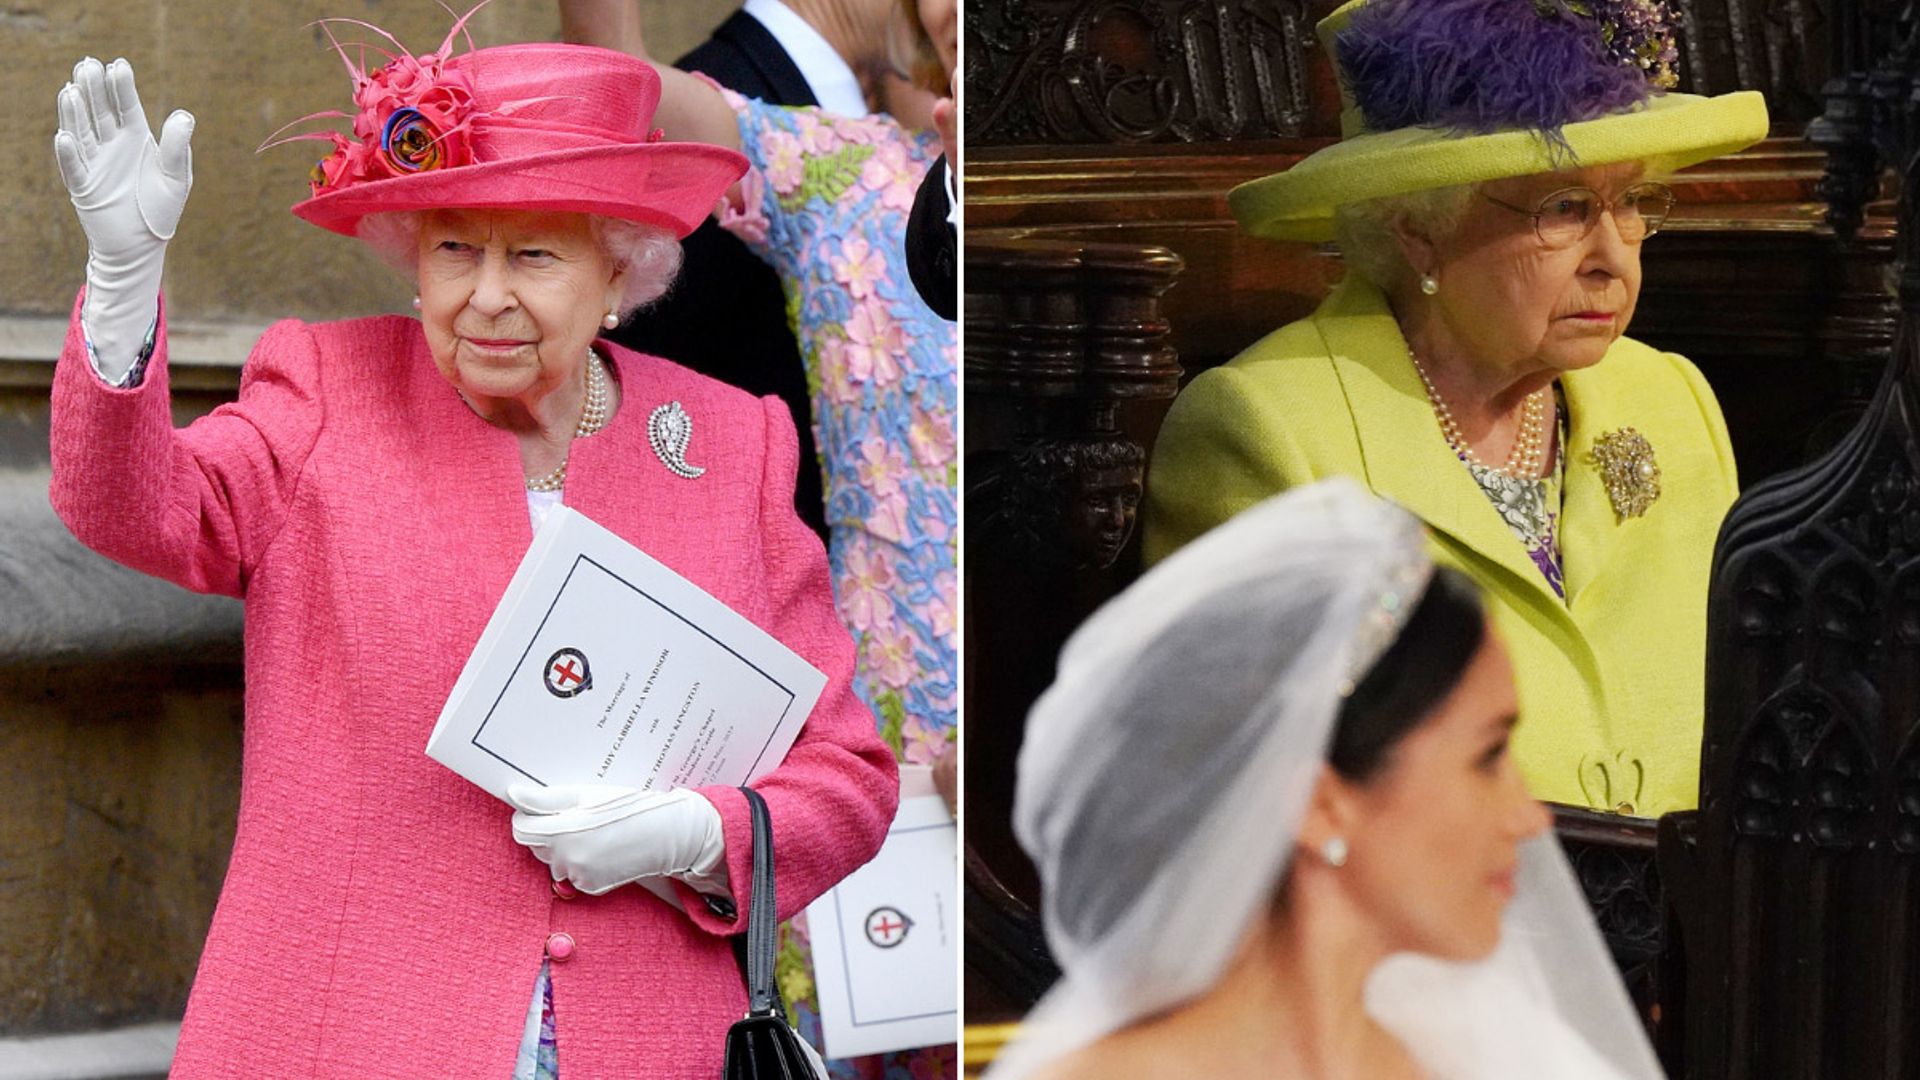 The Queen pre-approves royal marriages for this controversial reason